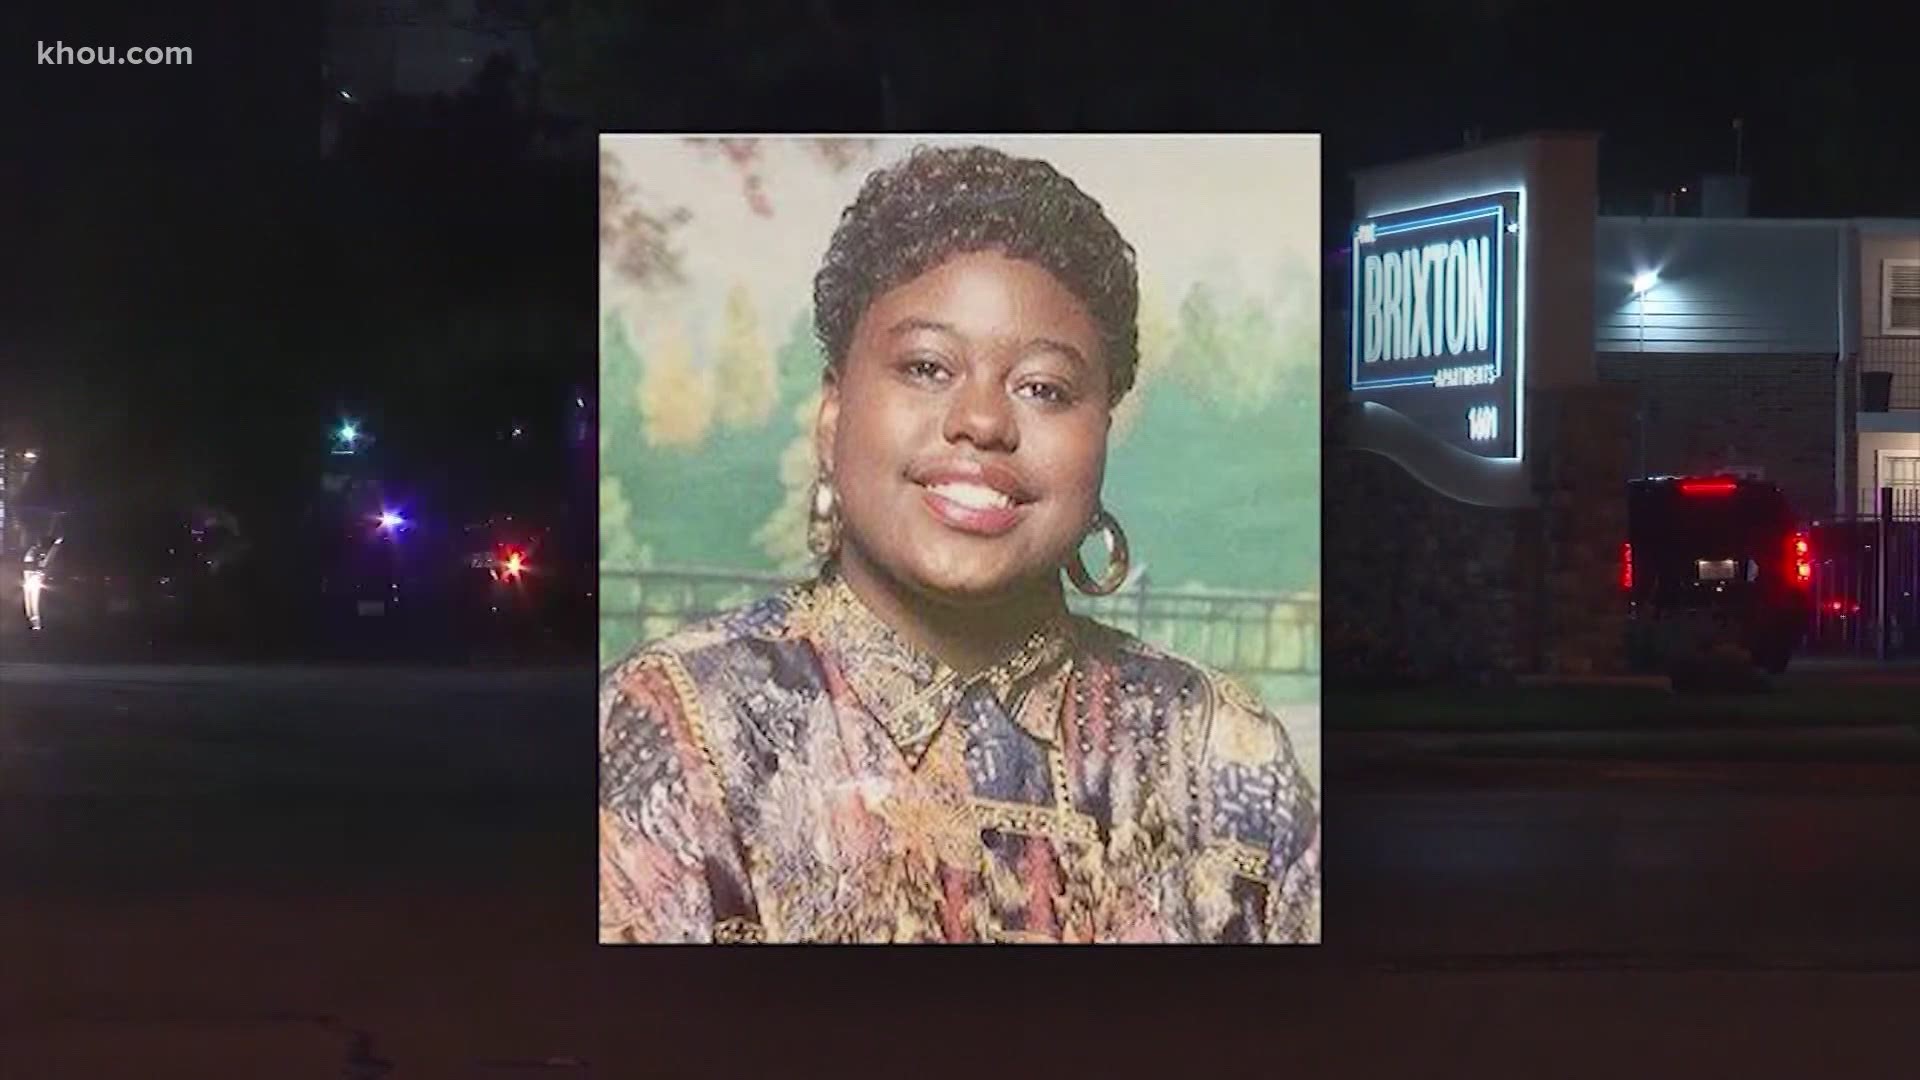 Pamela Turner was shot in May 2019 during an encounter with Officer Juan Delacruz in which he tried to arrest her for outstanding warrants.